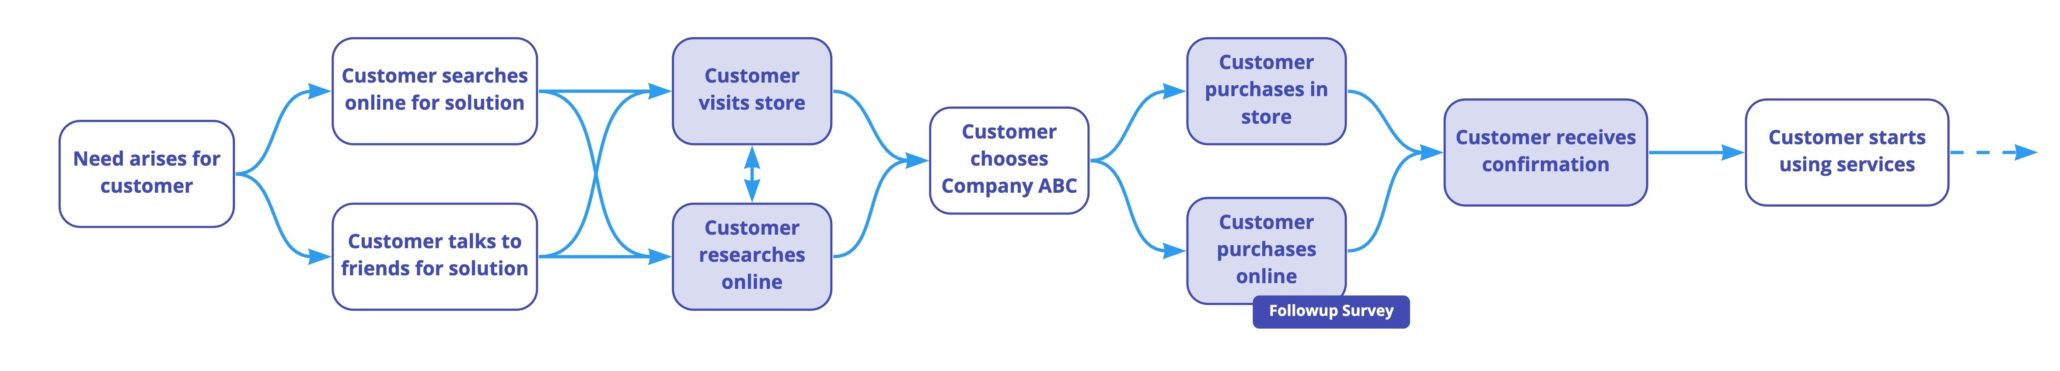 touchpoint map example during the customer feedback loop process